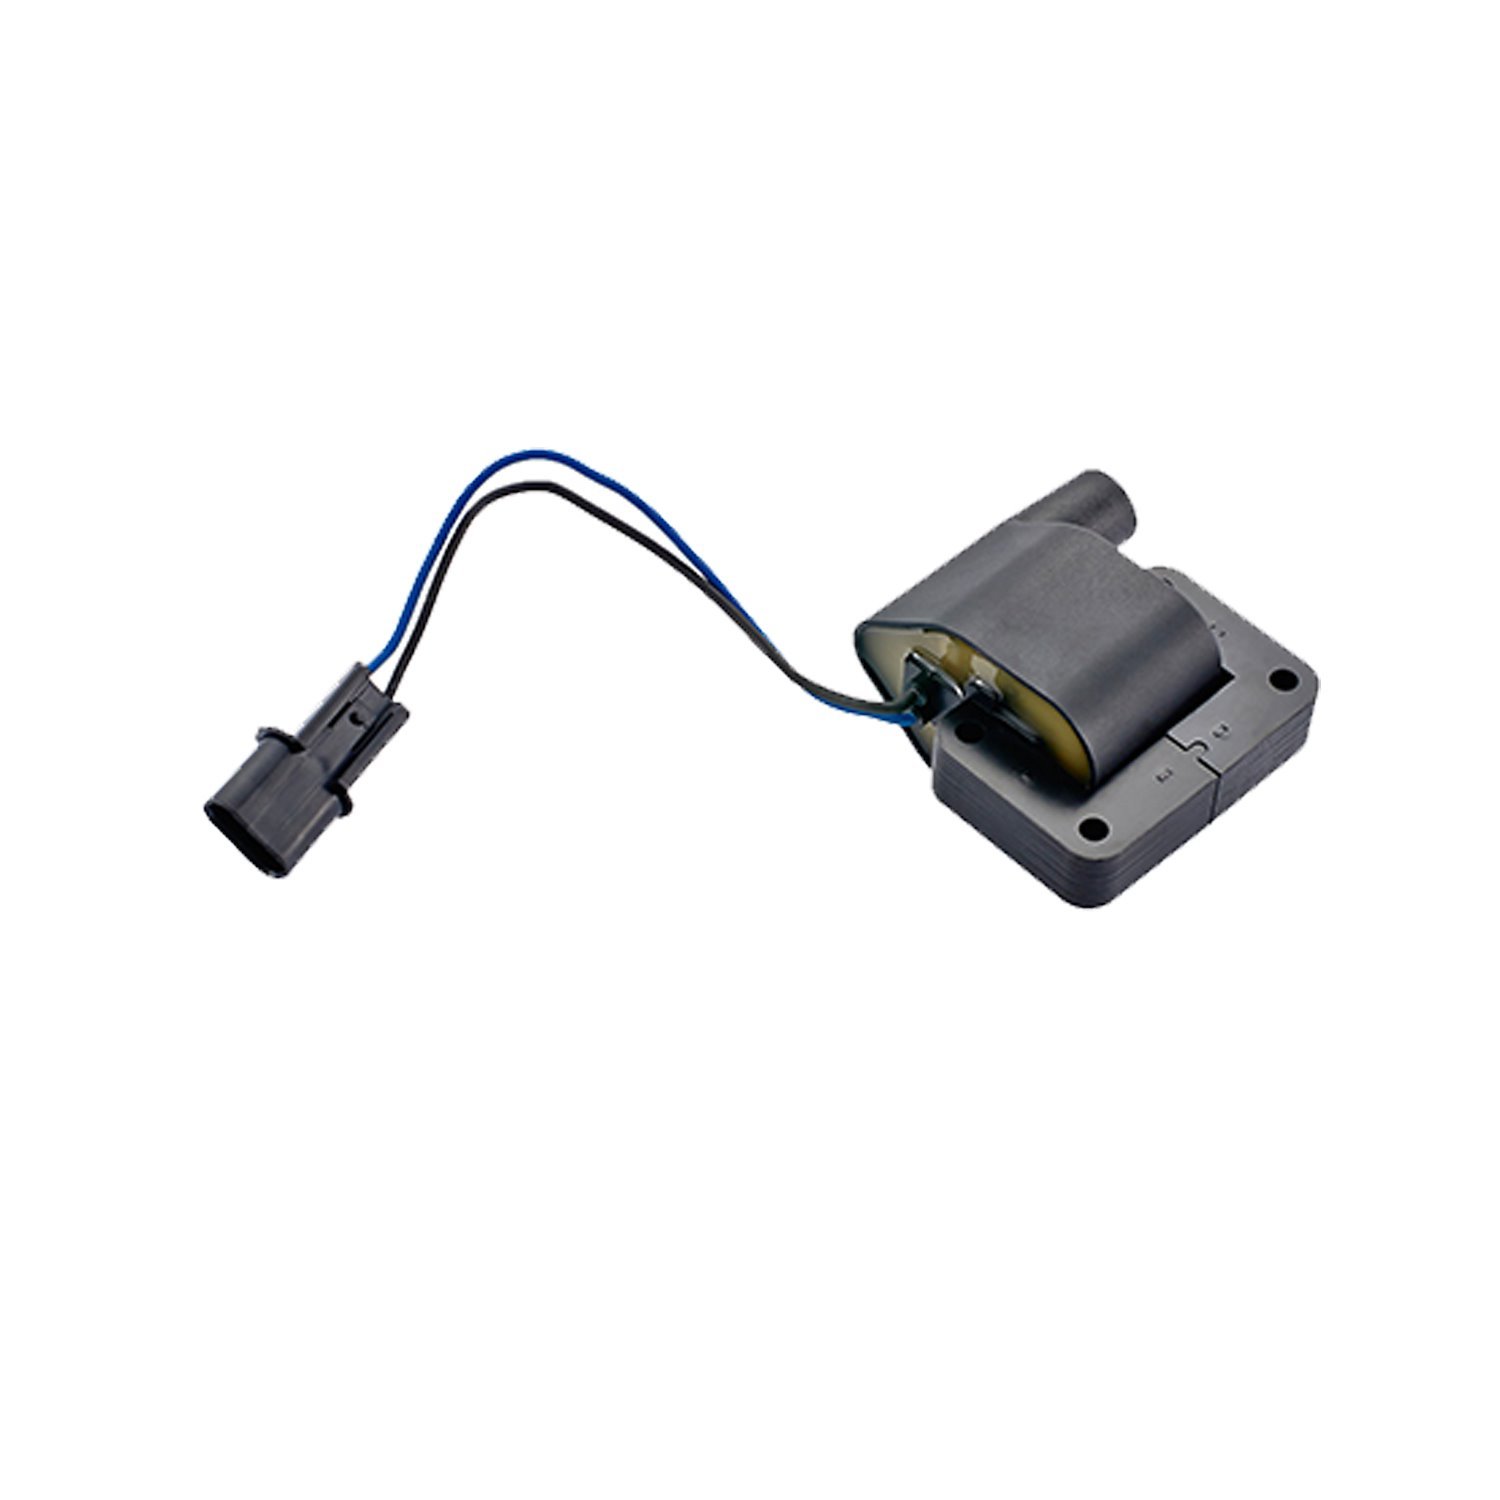 OE Replacement Ignition Coil for Mutsubishi Van L-300